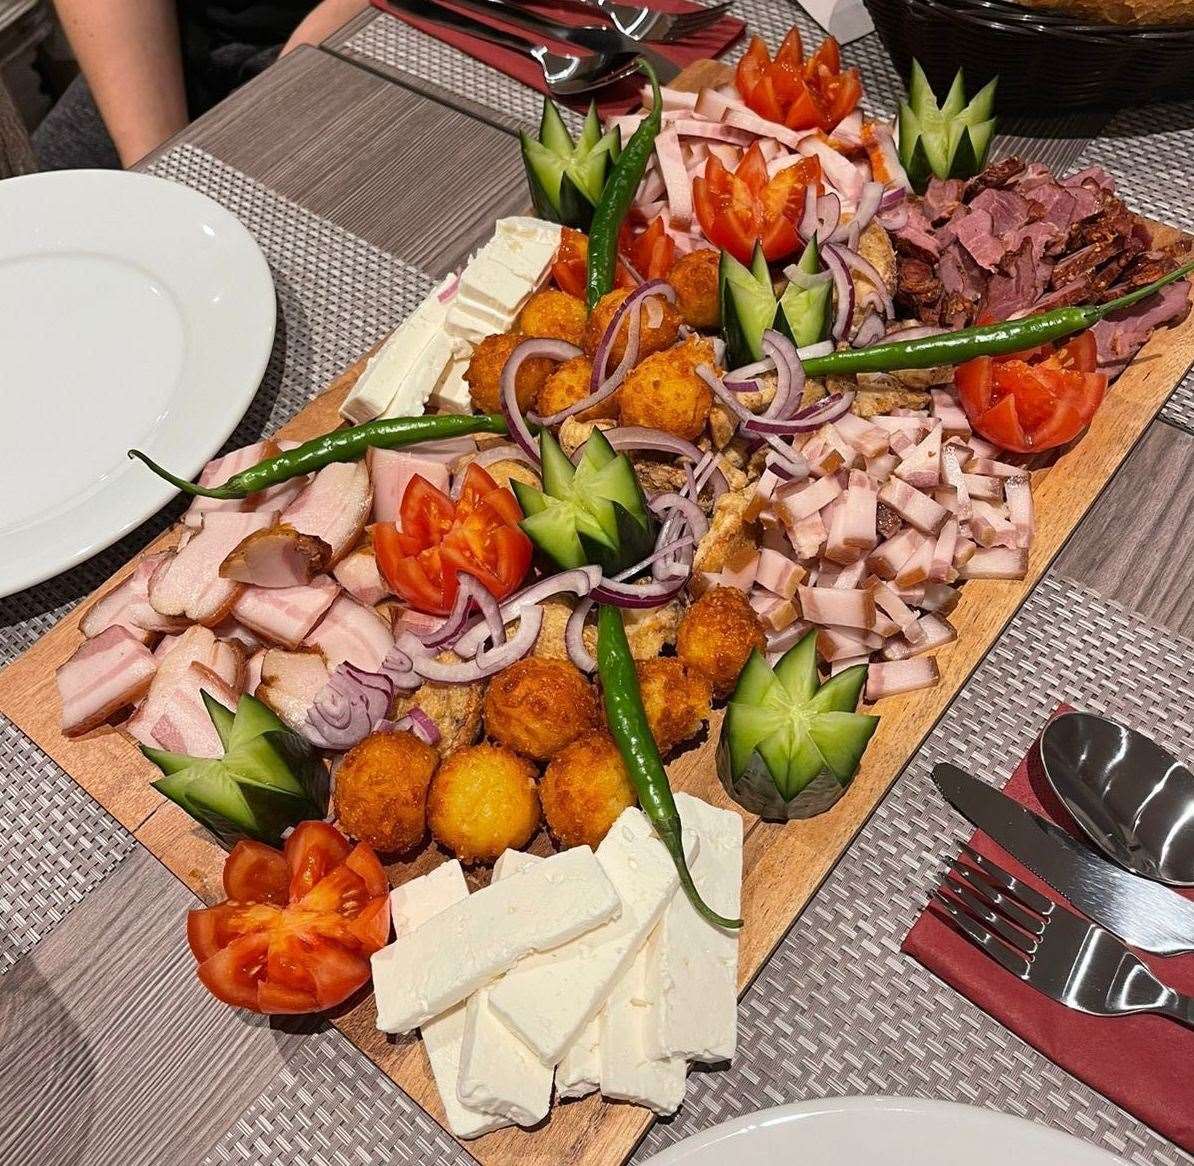 Cold traditional countryside platter including pork scathing, meatballs, ham, cheese aubergine salad, olives and vegetables. Picture: Vasile Conduraru